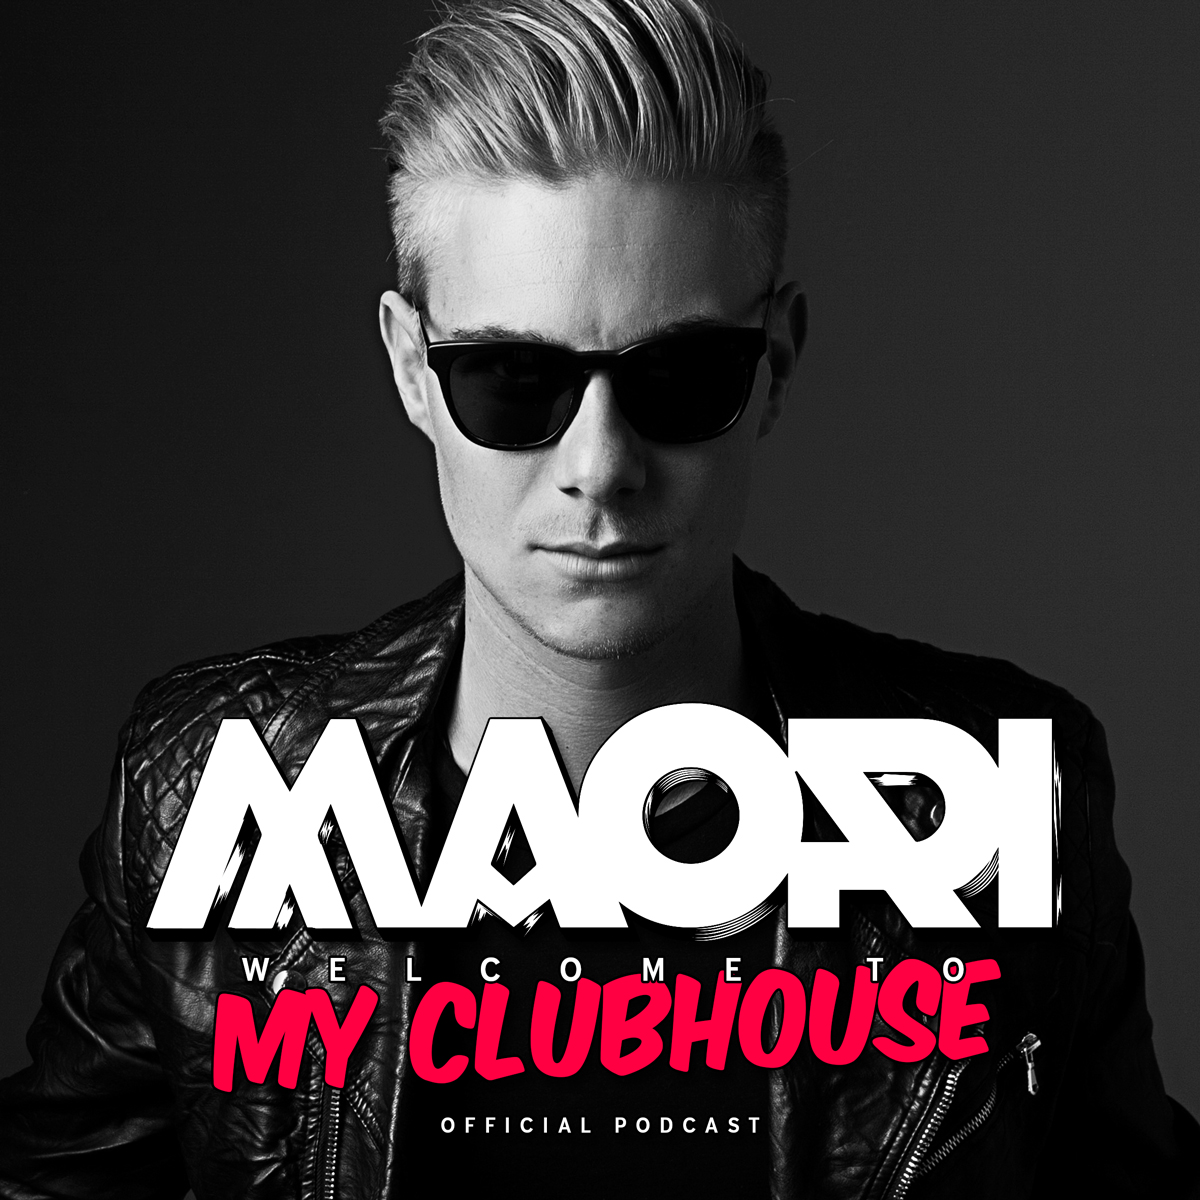 My Clubhouse by Maori - Podcast #037